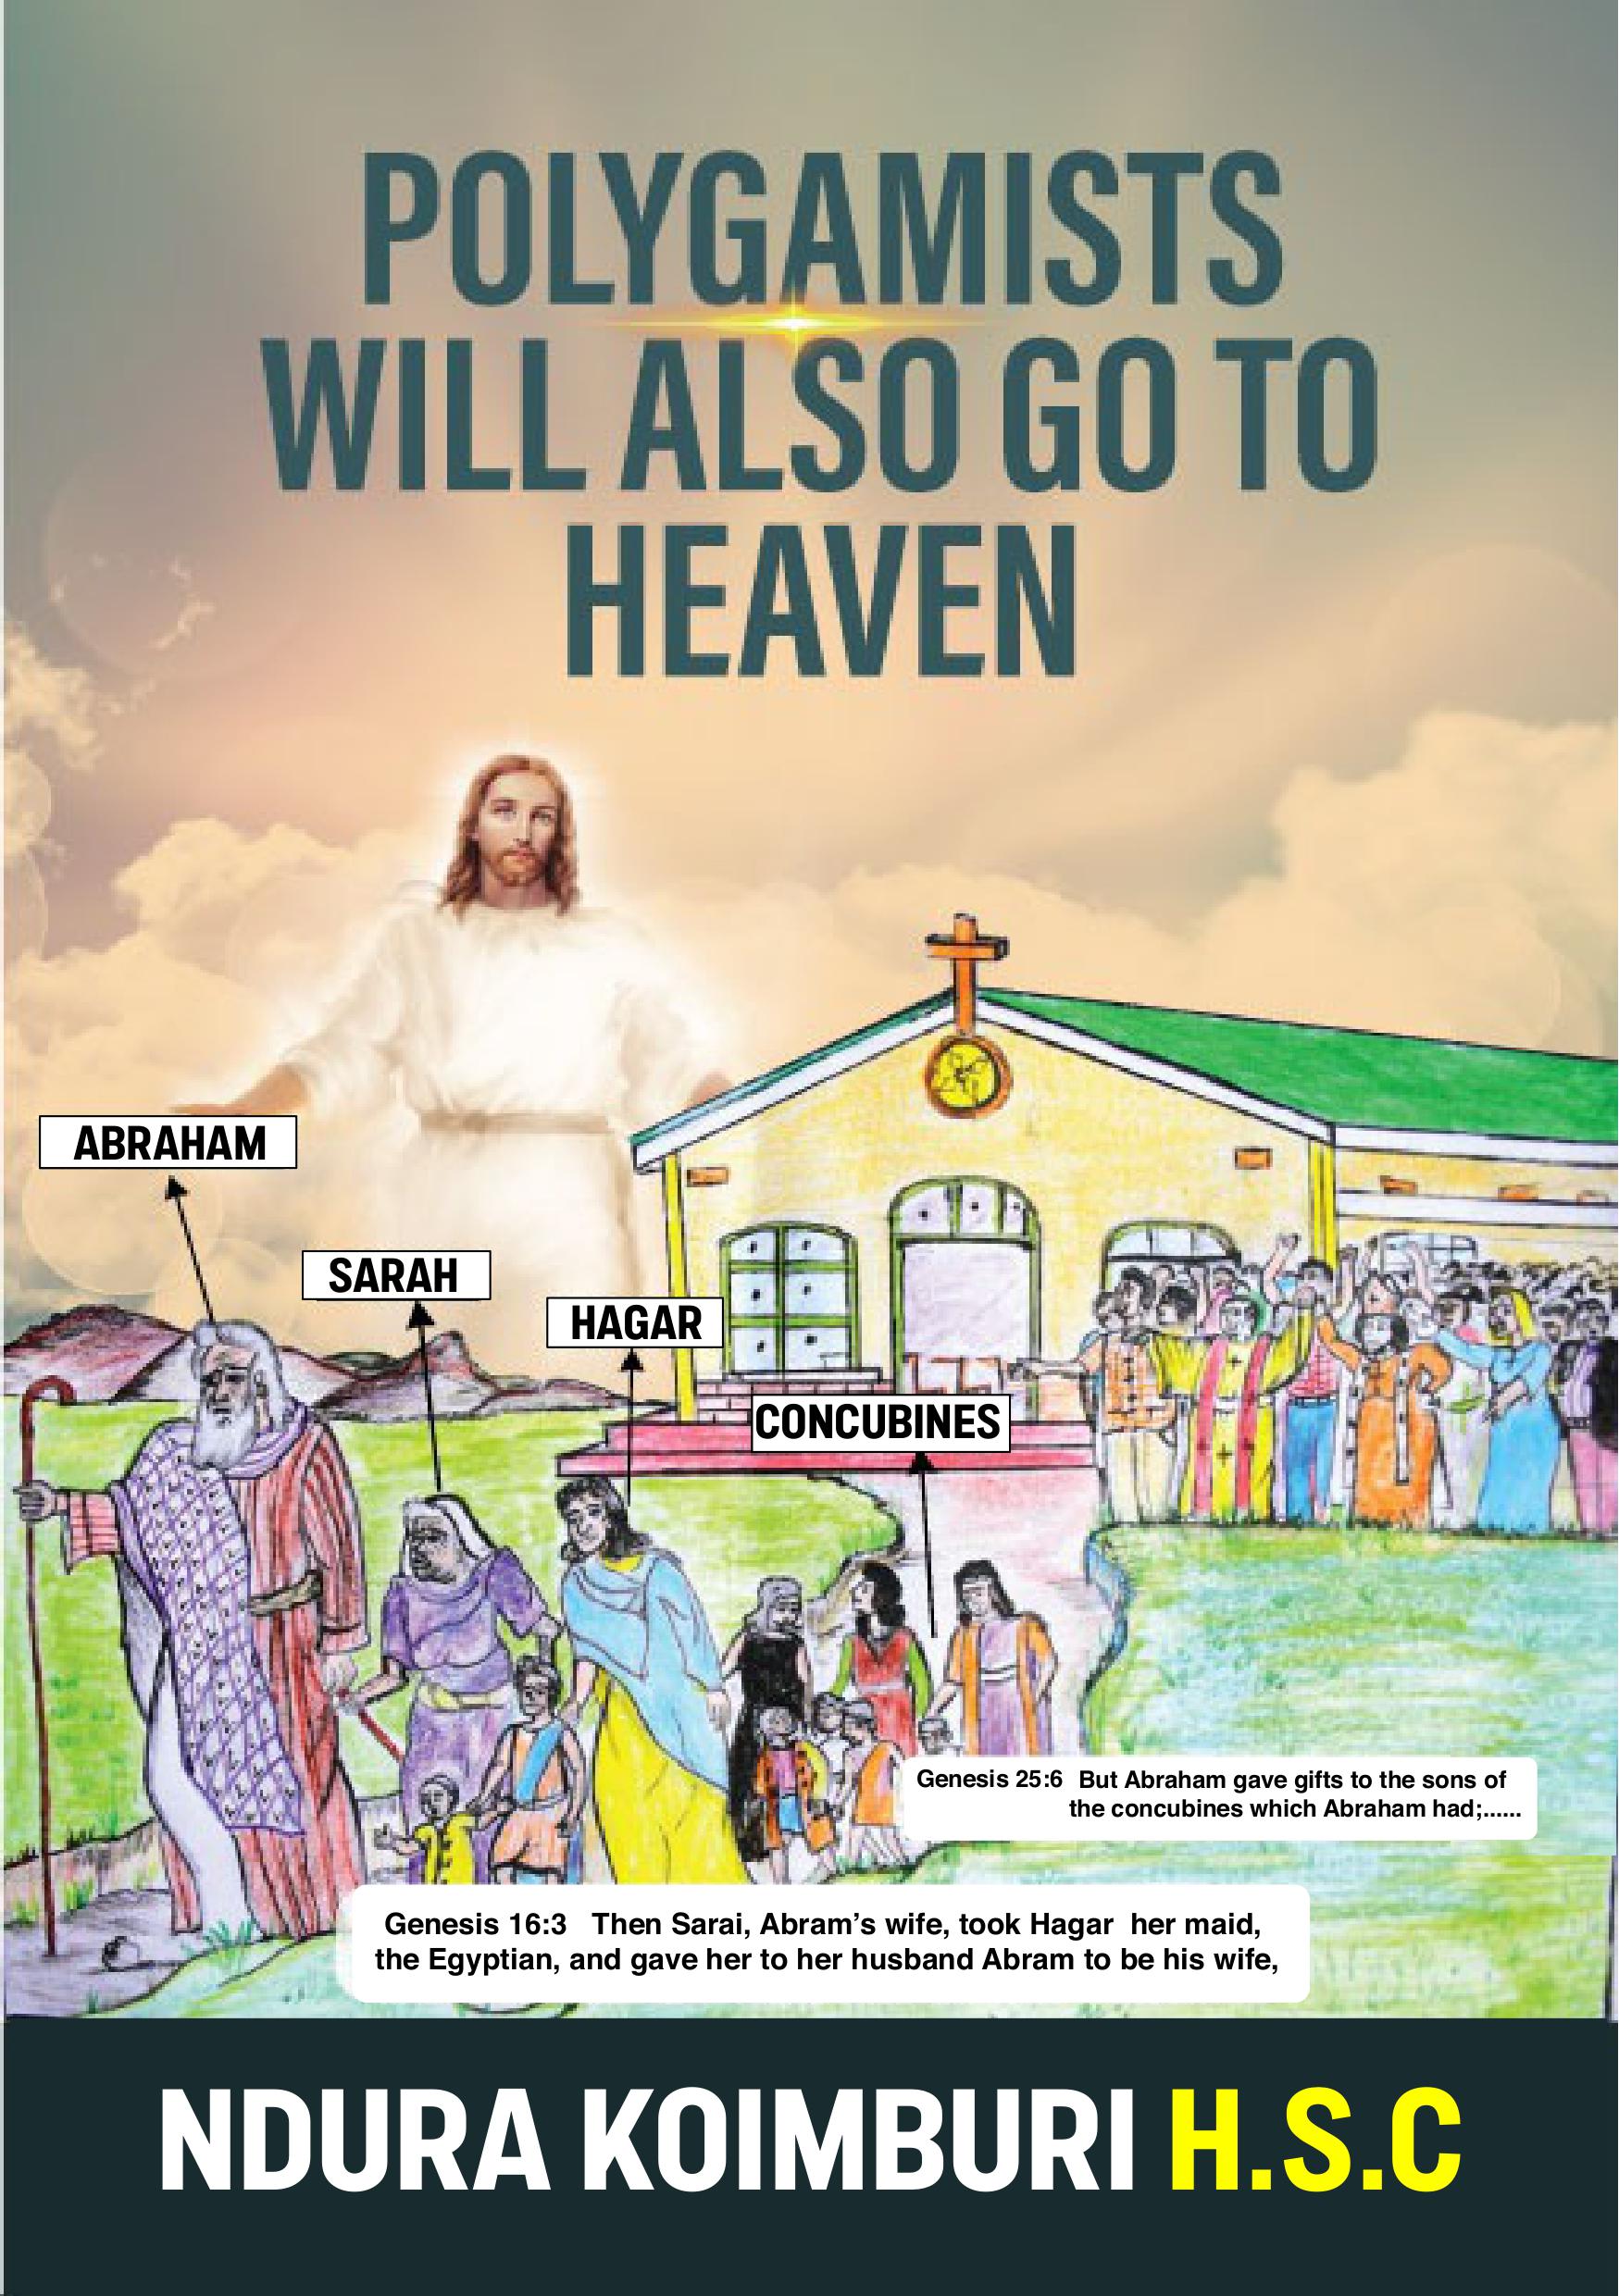 polygamist also go to heaven front Cocer